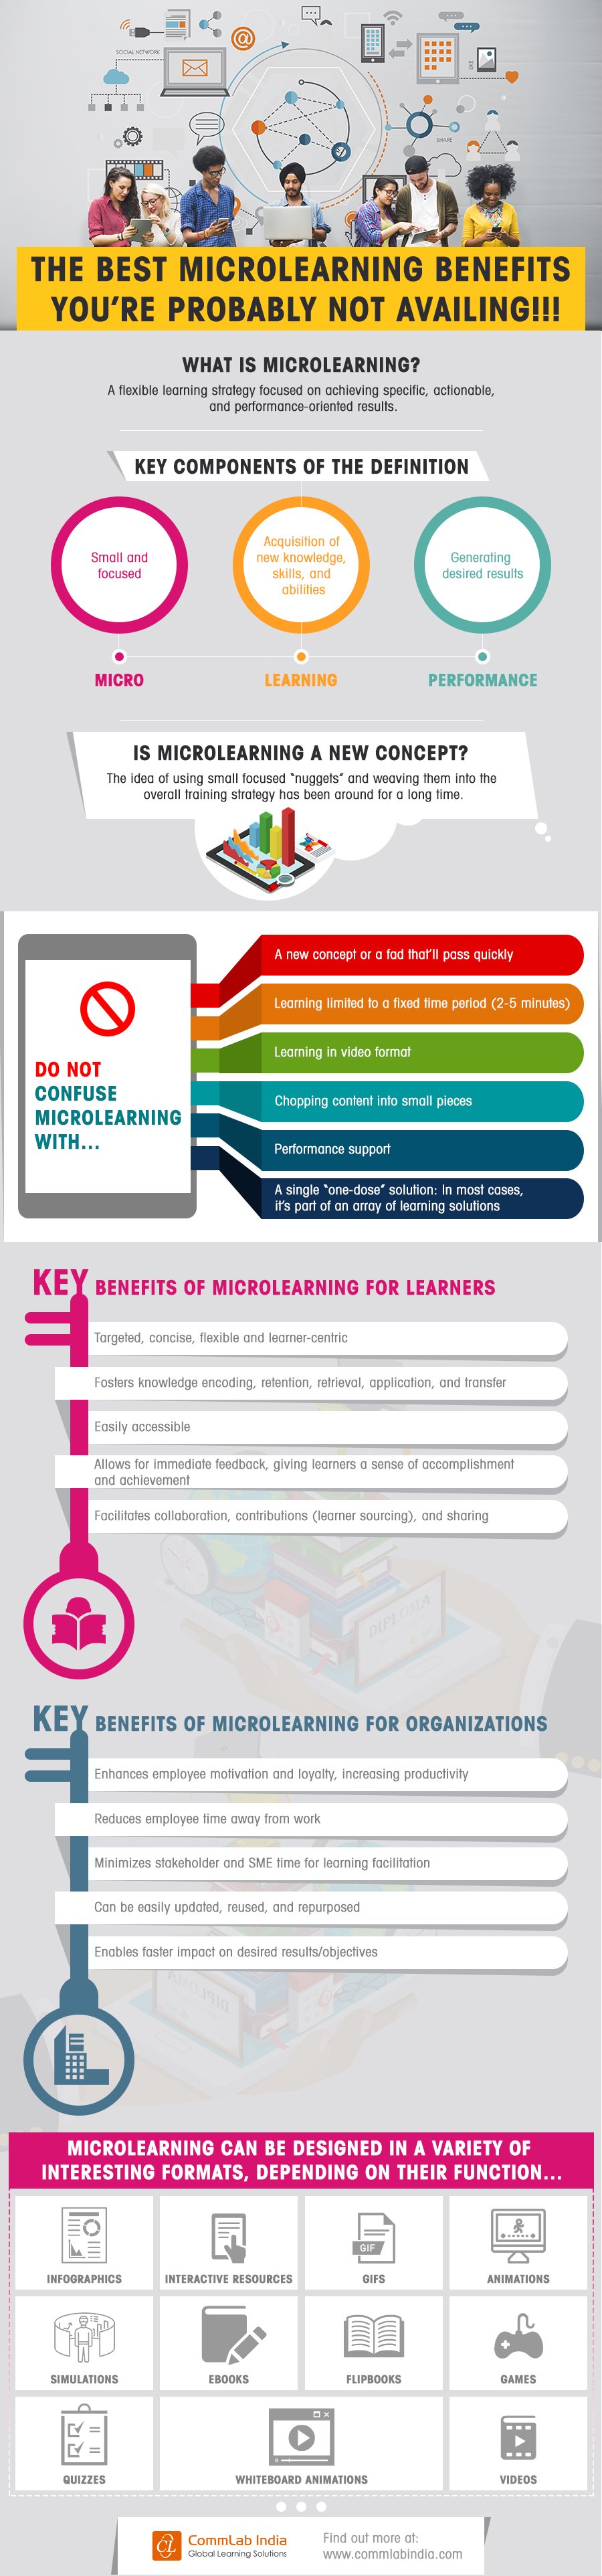 The Best Microlearning Benefits You’re Probably Not Availing [Infographic]